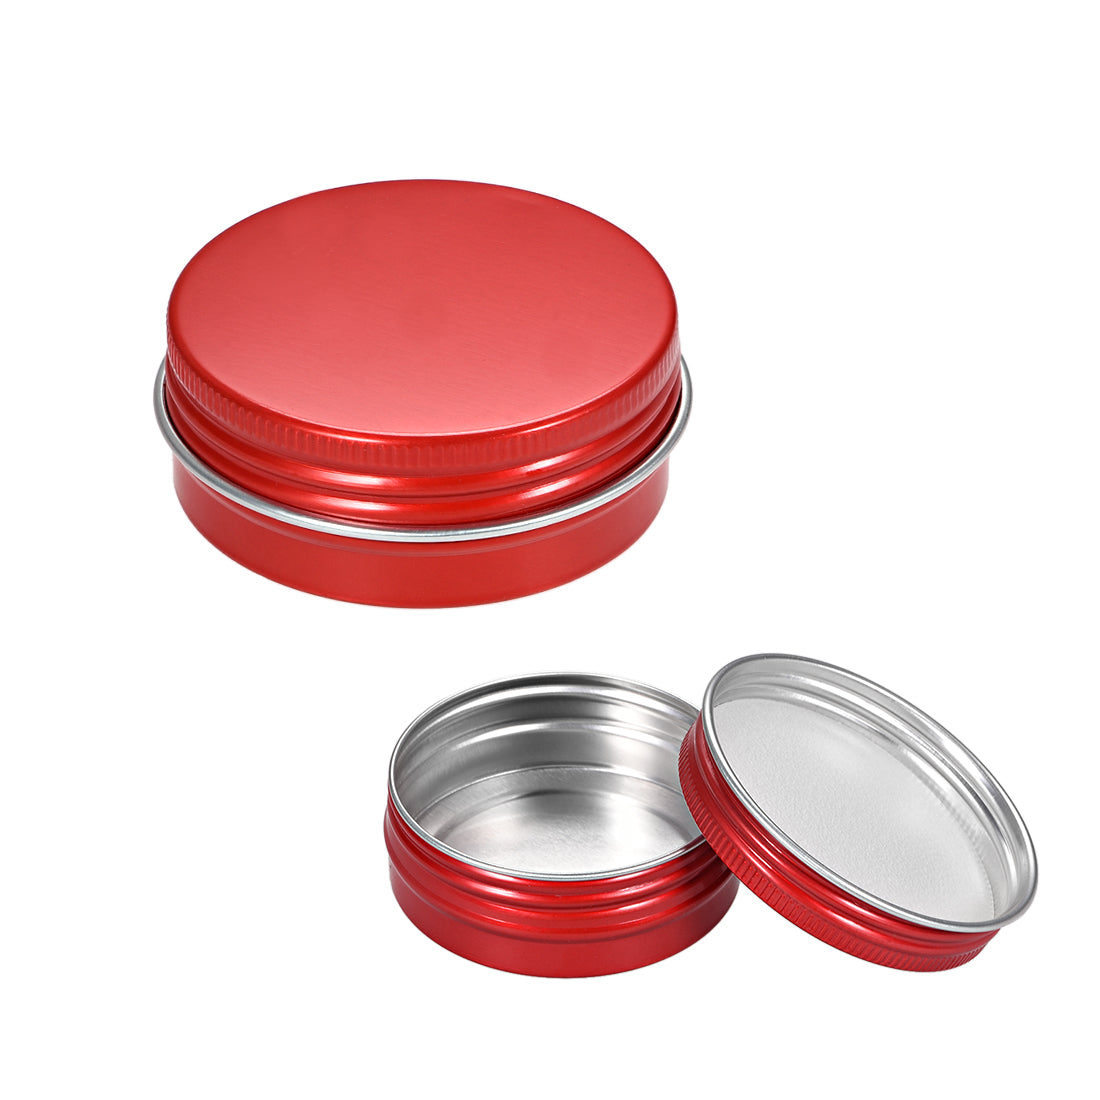 uxcell Uxcell 1 oz Round Aluminum Cans Tin Can Screw Top Metal Lid Containers Red 30ml 24pcs